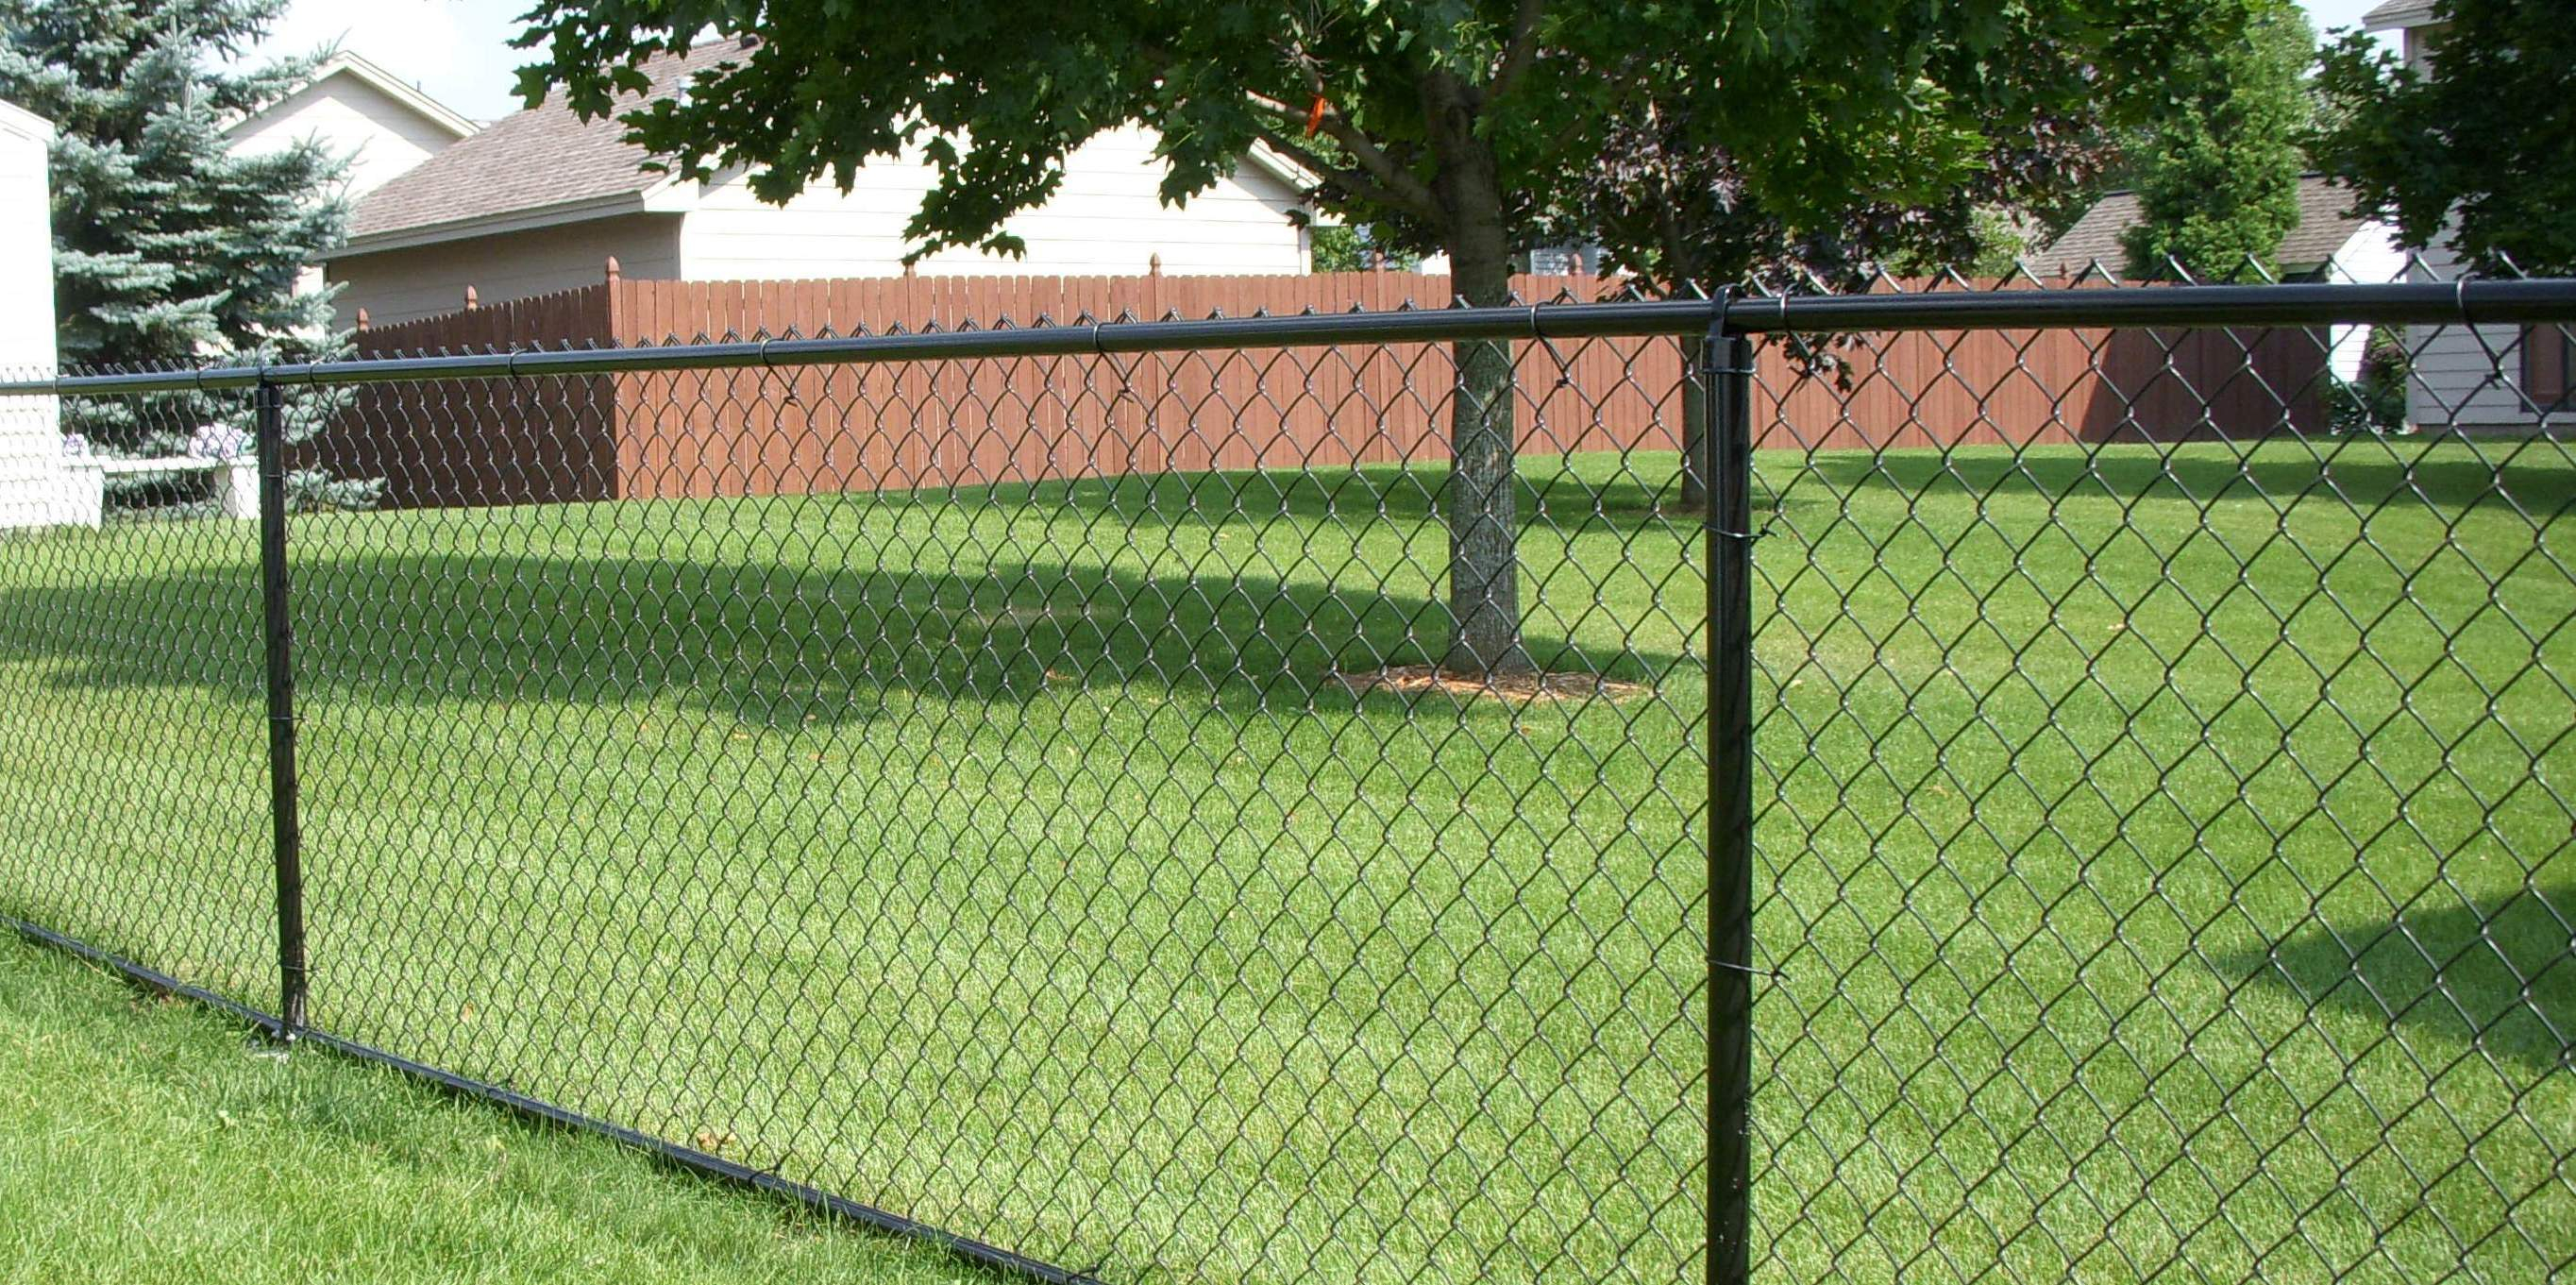 Residential Black Vinyl Chain Link Installation Fence Okc in size 2729 X 1361